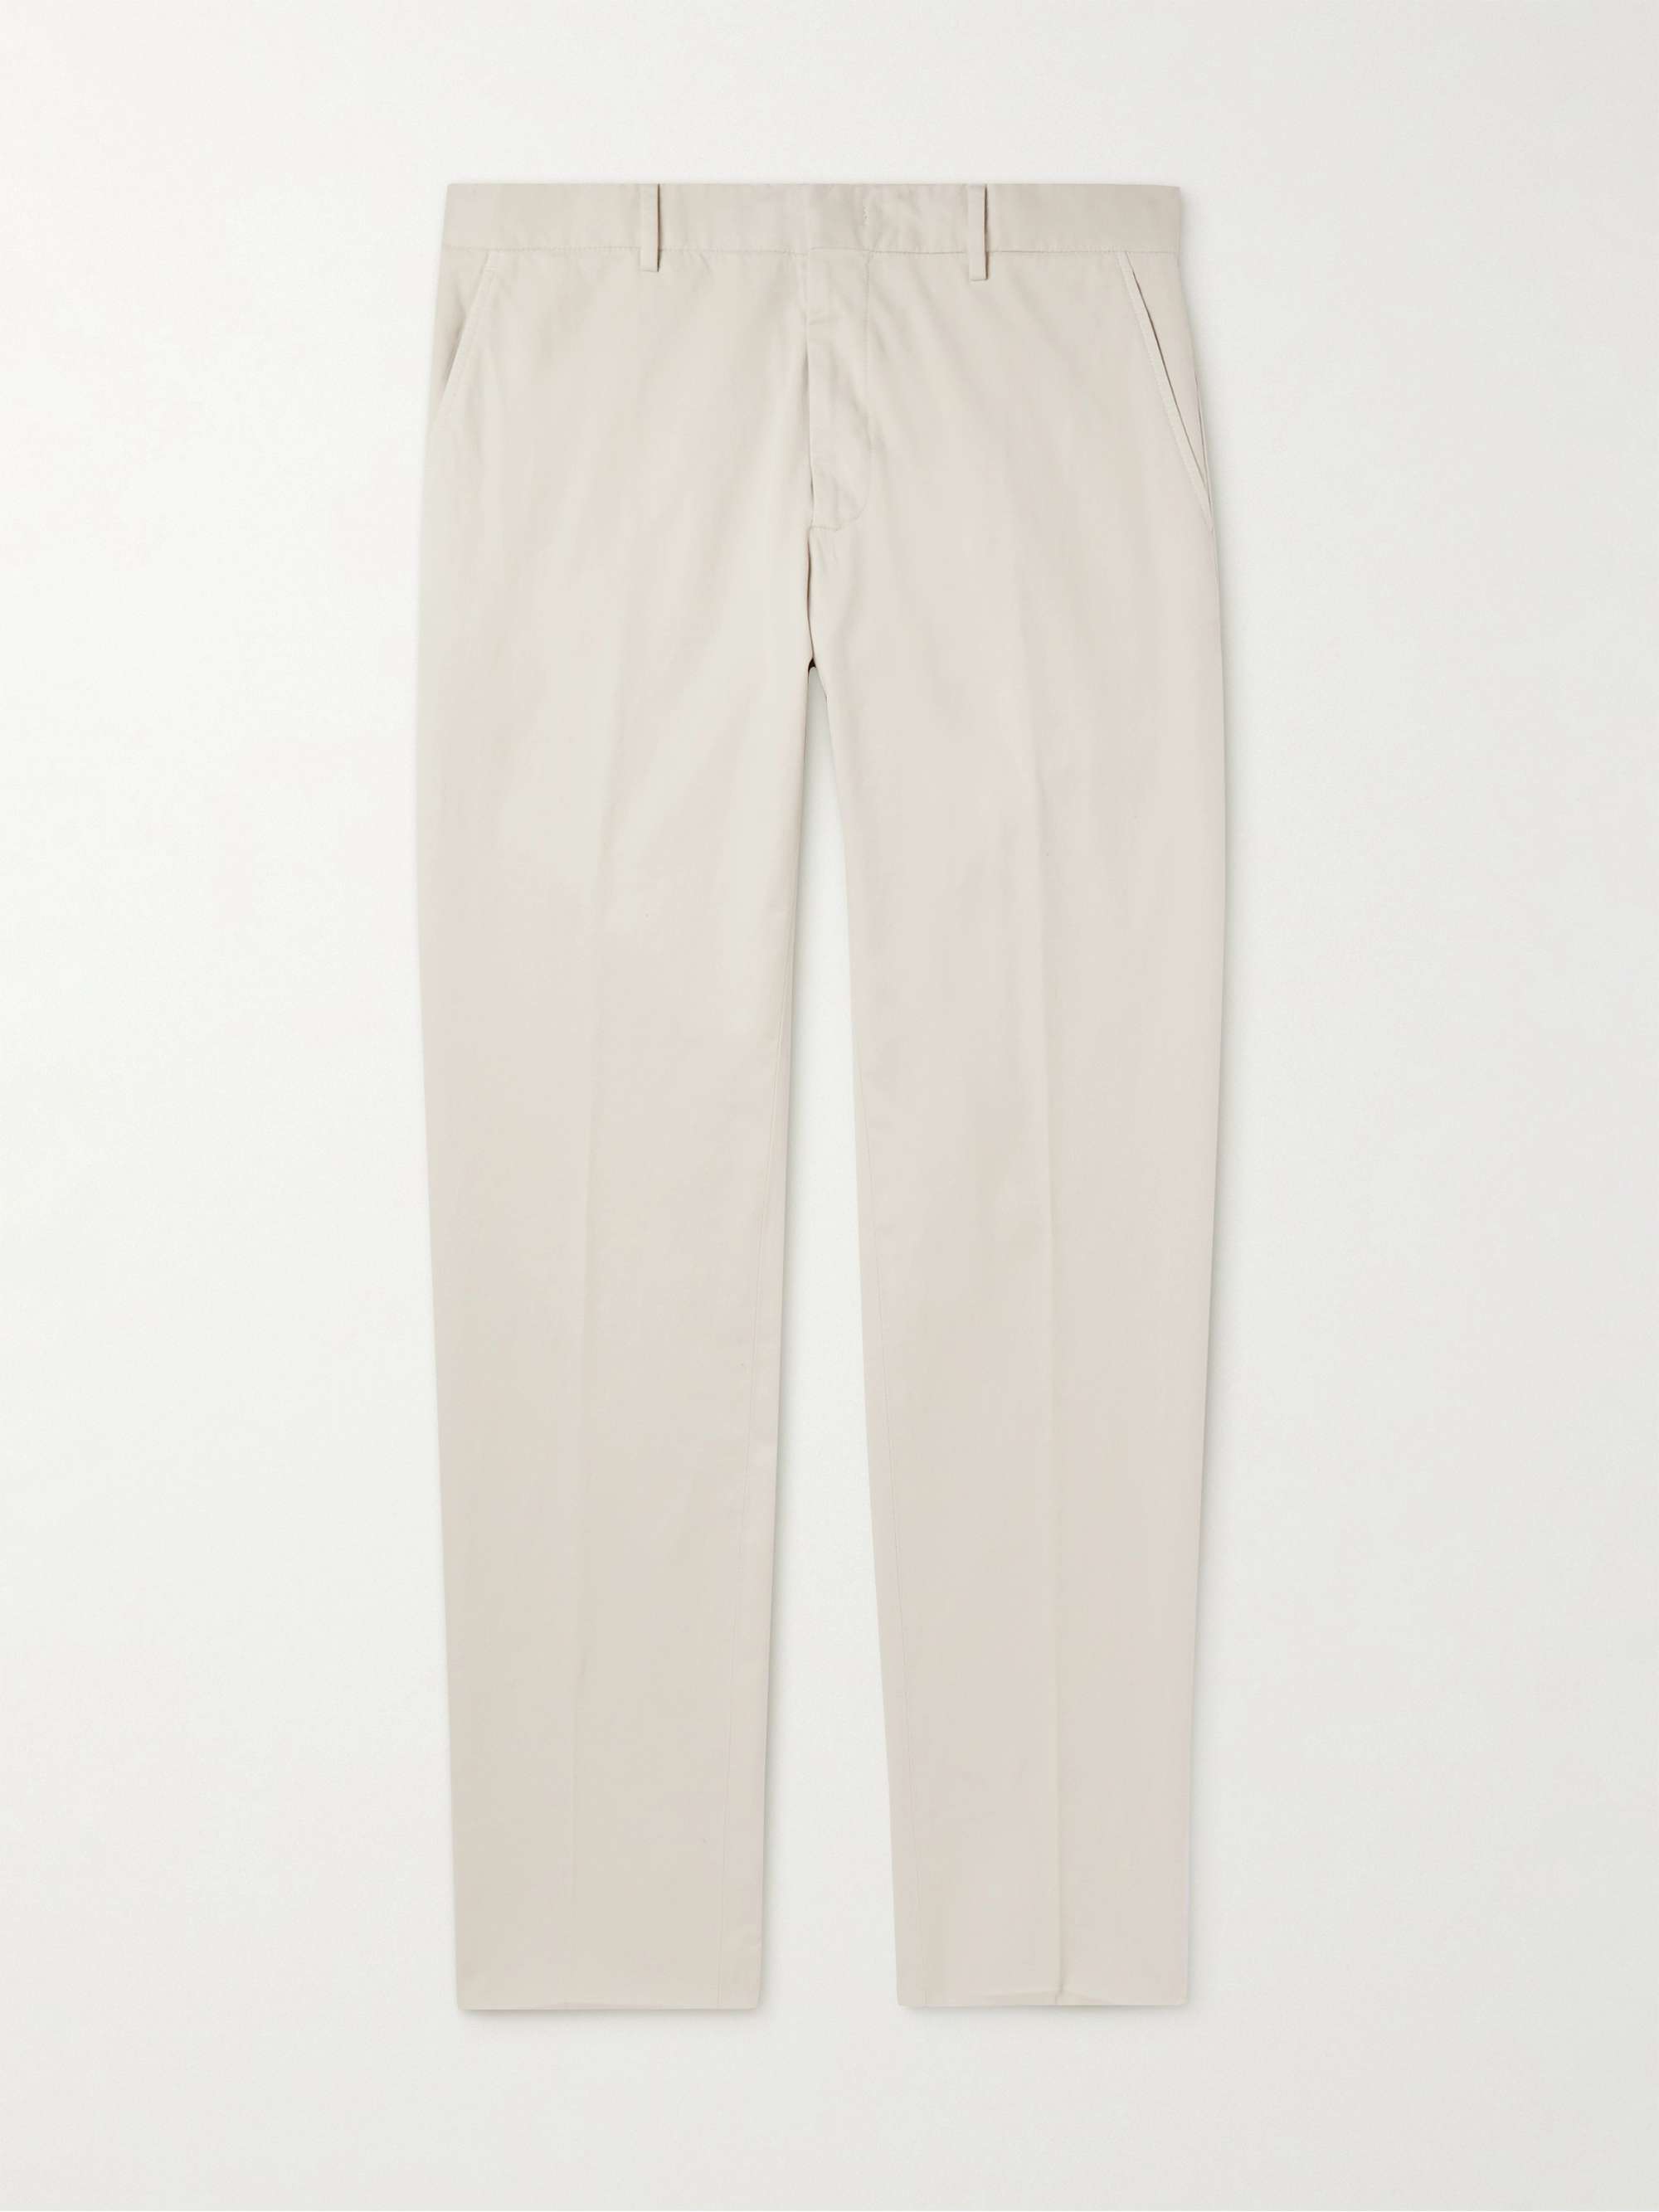 ZEGNA Tapered Cotton-Blend Twill Trousers for Men | MR PORTER